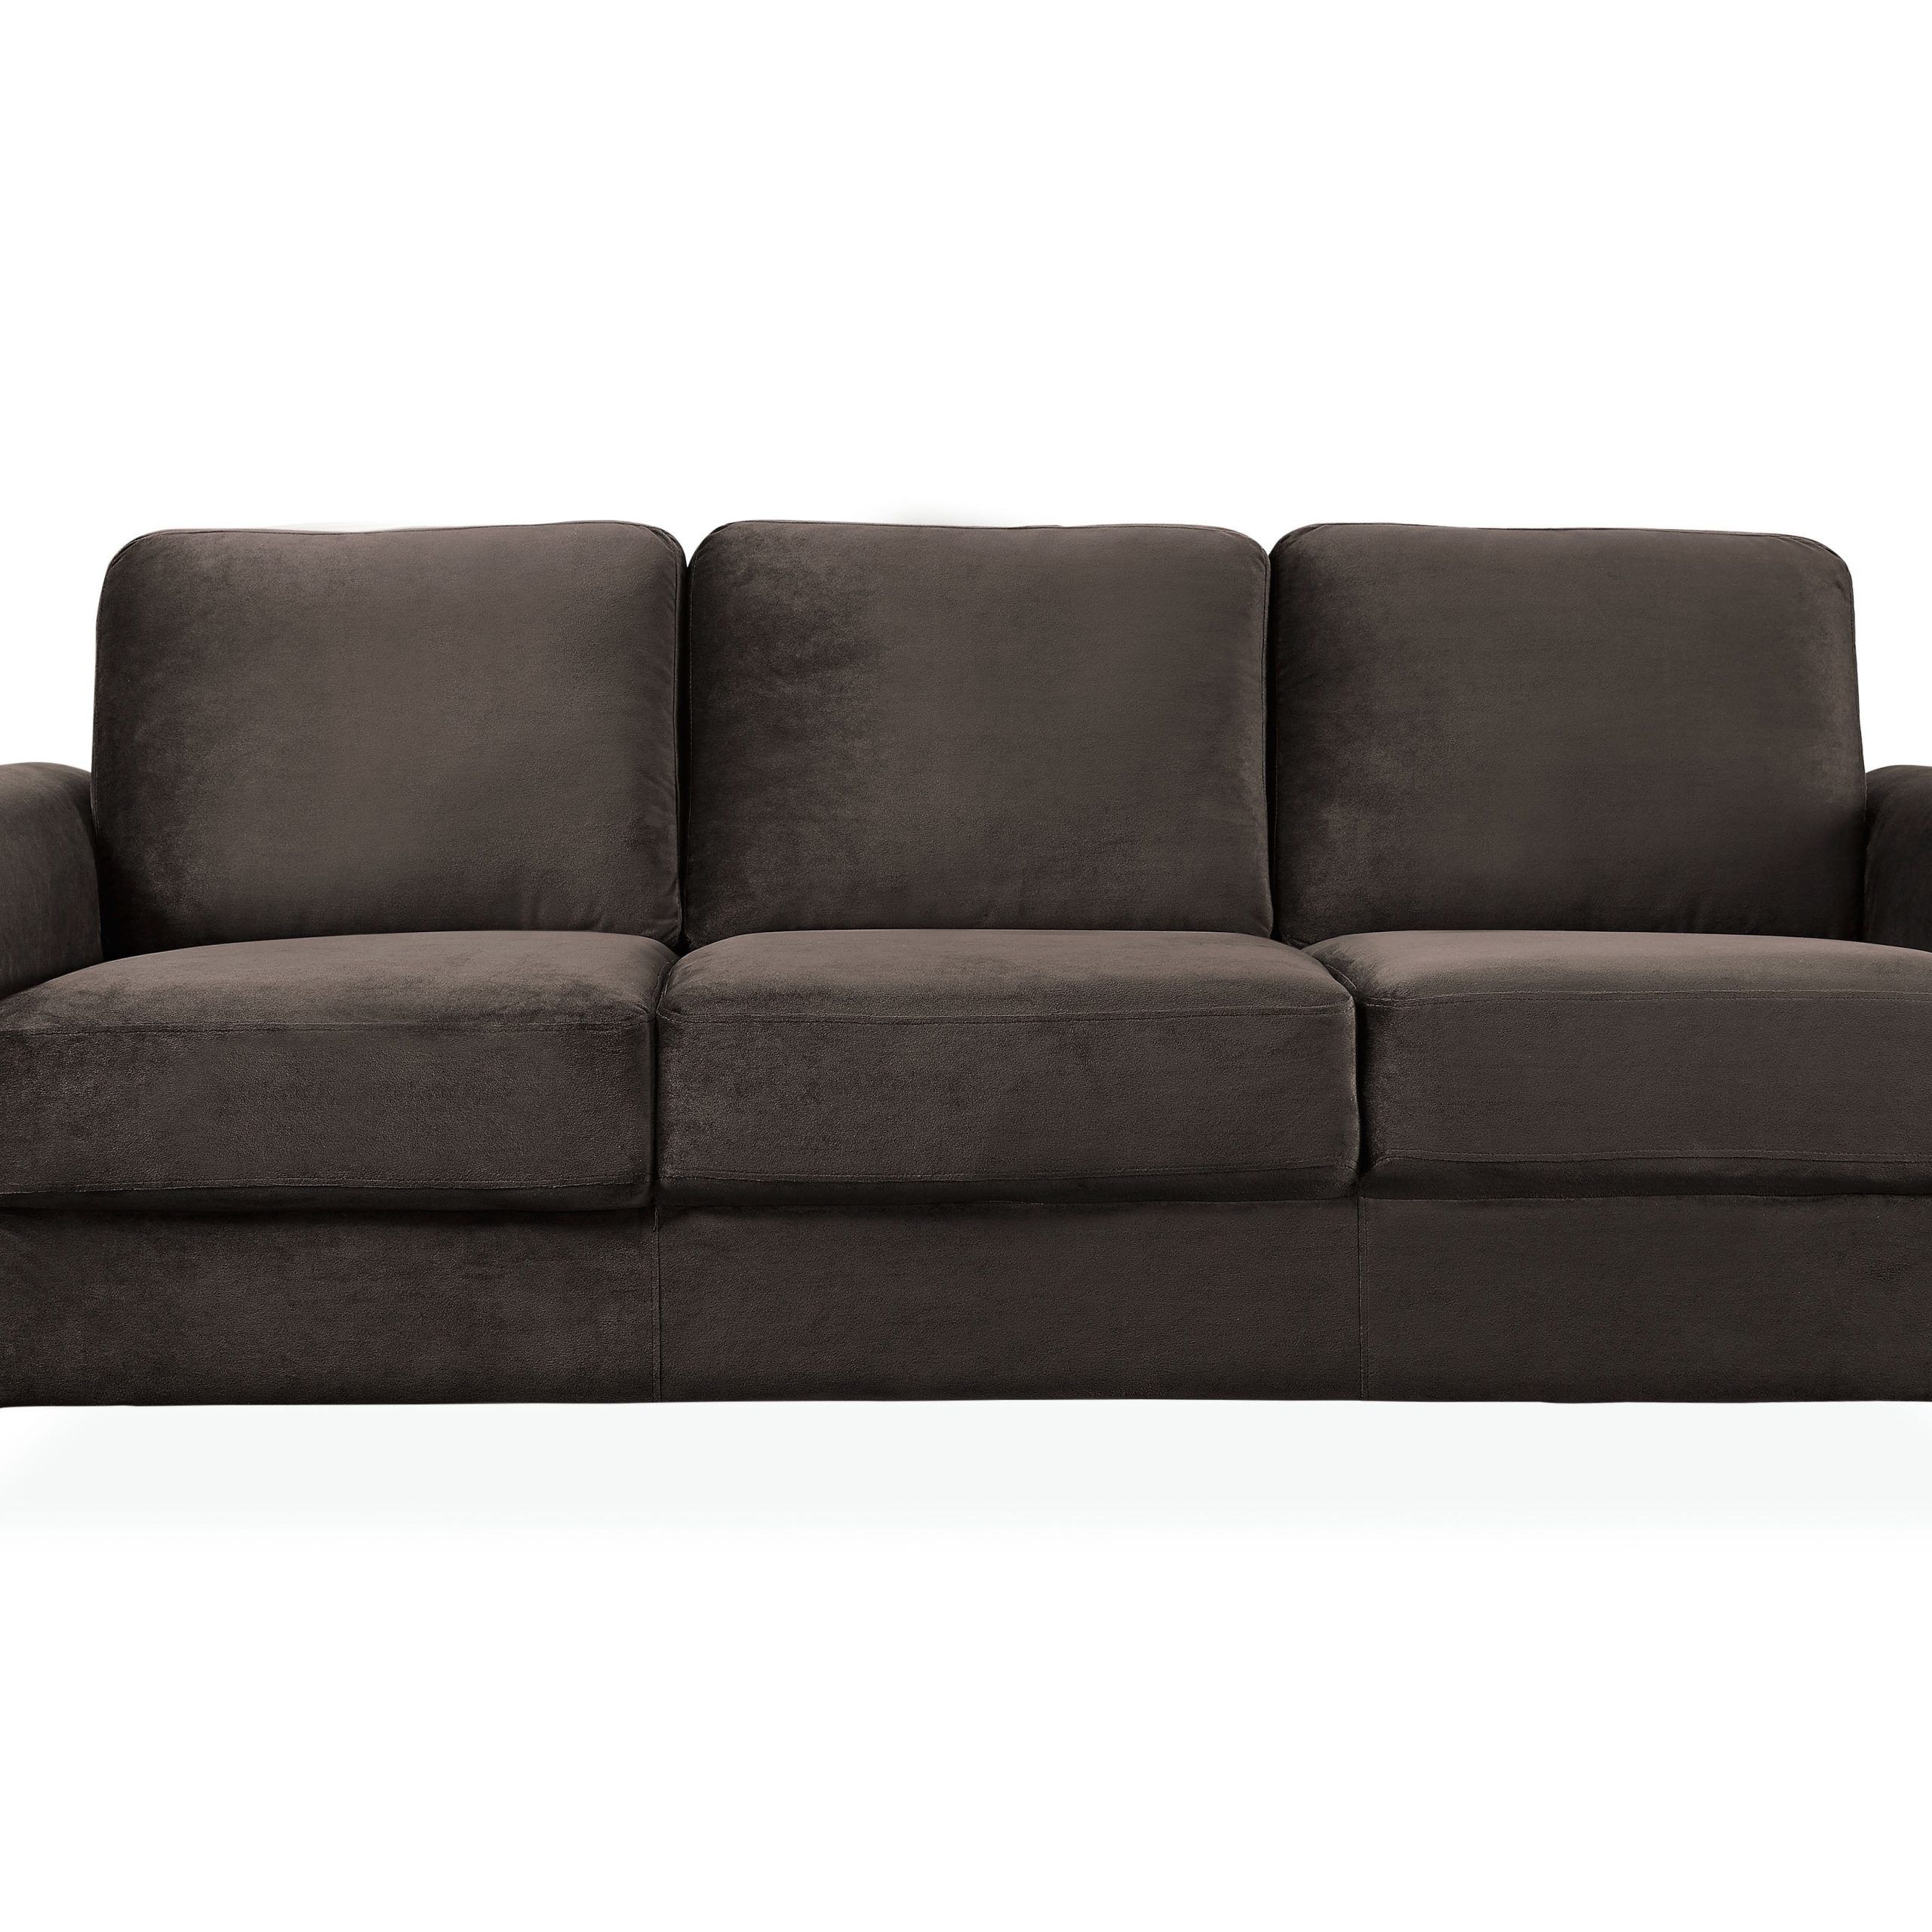 Lifestyle Solutions Alexa Sofa With Curved Arms, Gray Fabric – Walmart For Sofas With Curved Arms (View 7 of 15)